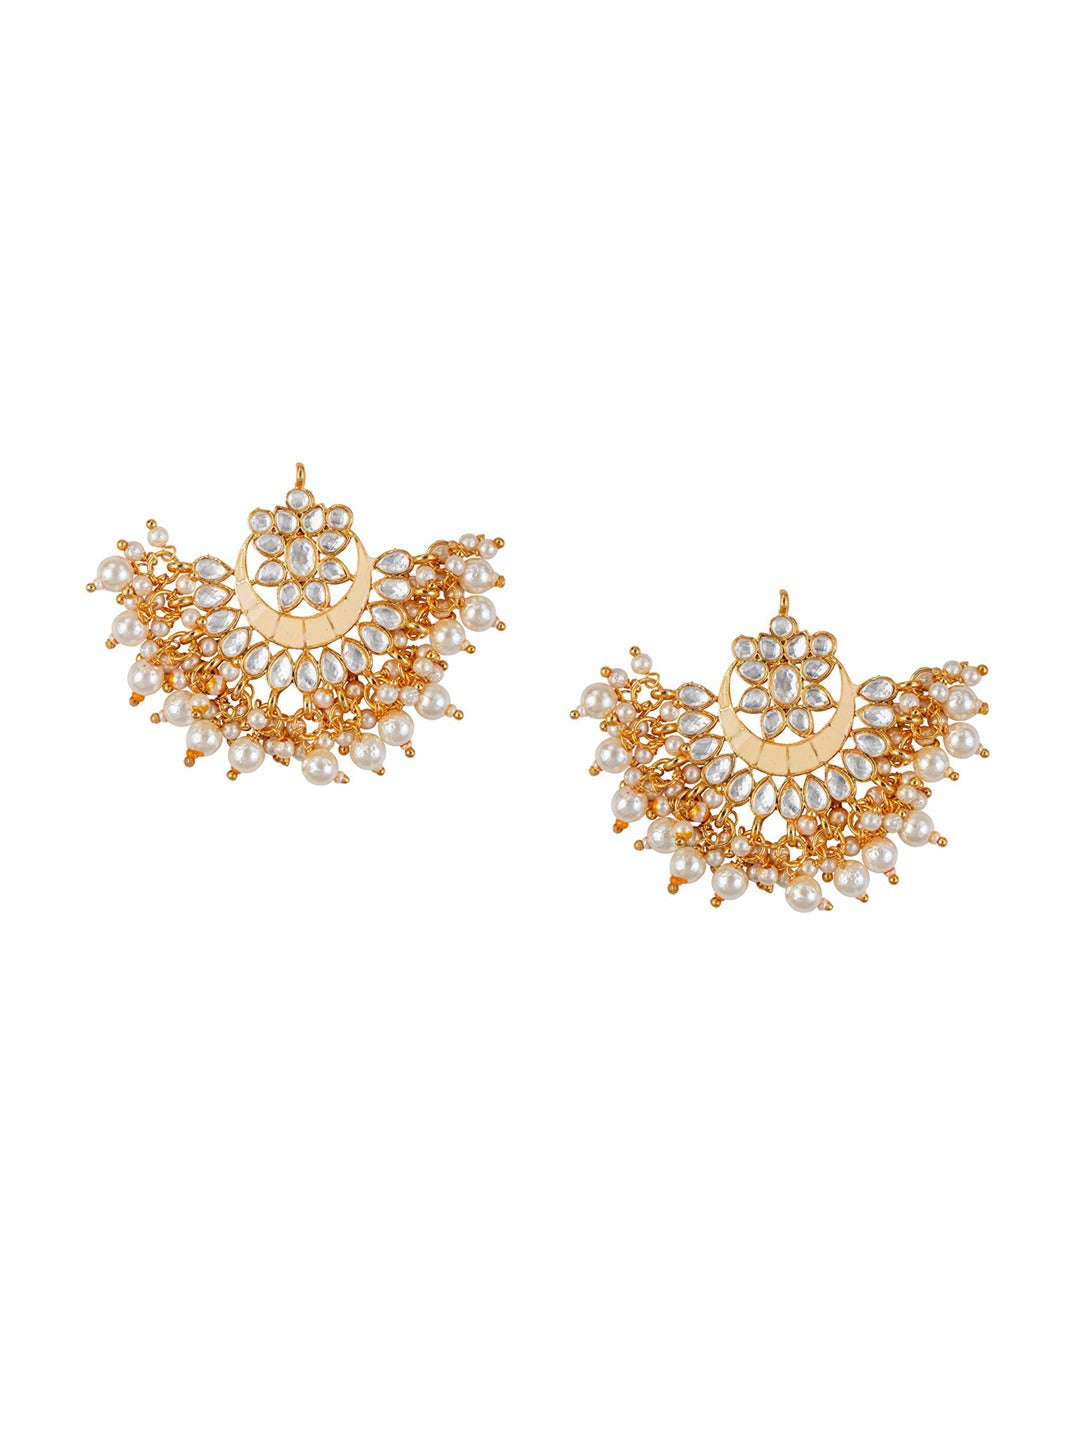 Women's Peach & Gold-Toned Contemporary Chandbalis Earrings - Morkanth